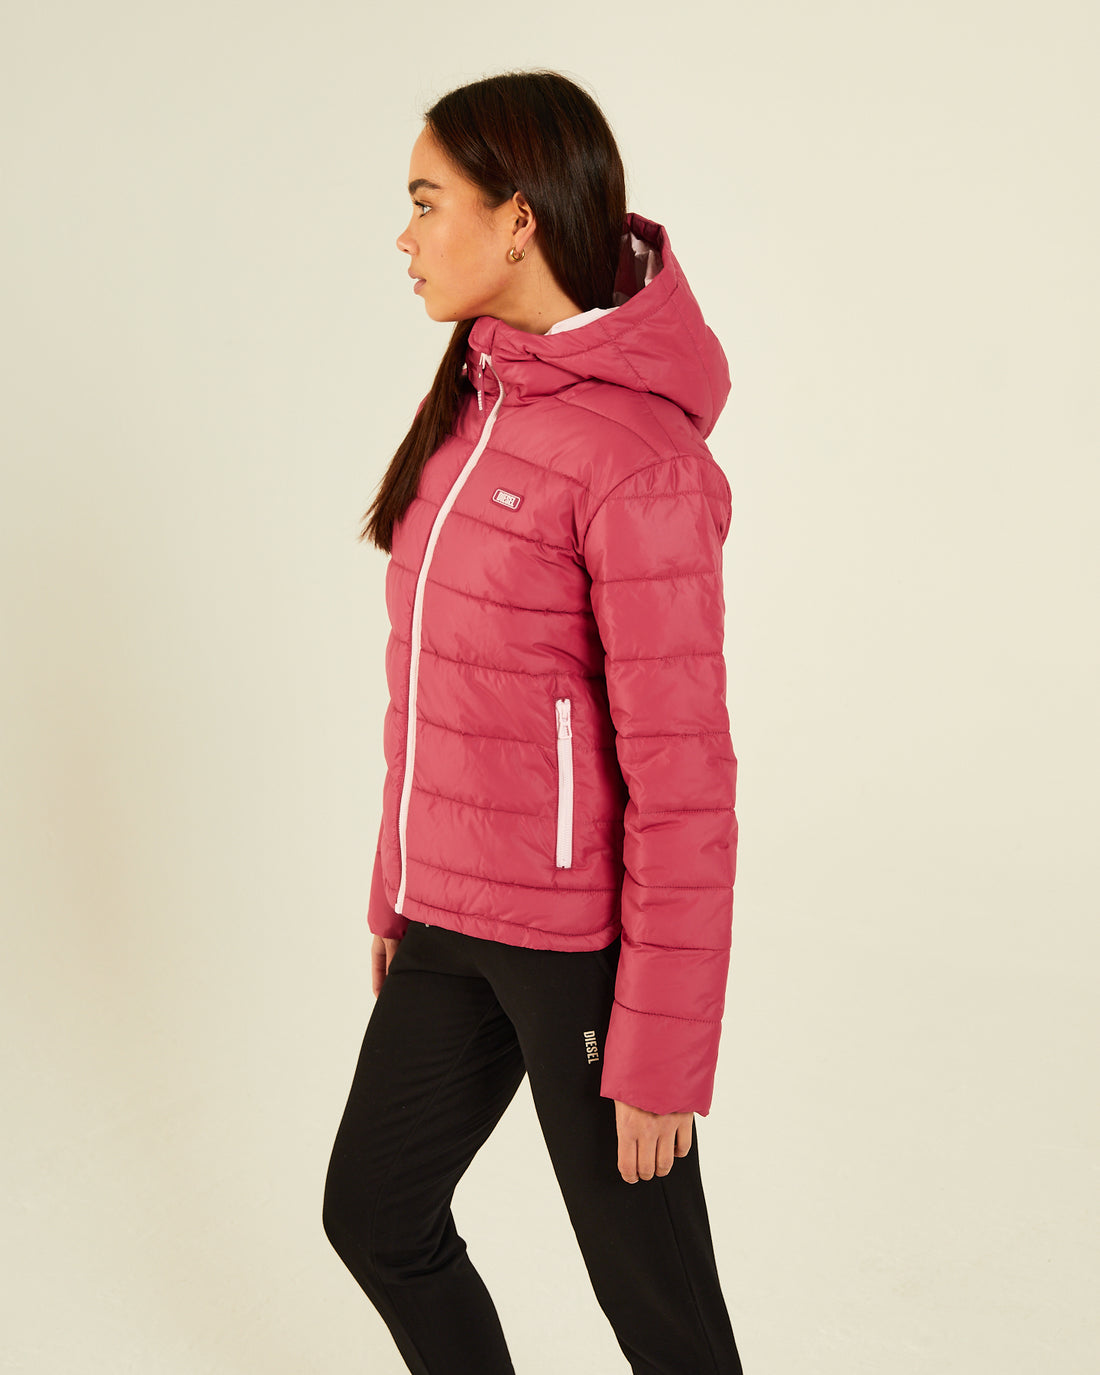 Donna Berry Sorbet Women's Jacket-Side view